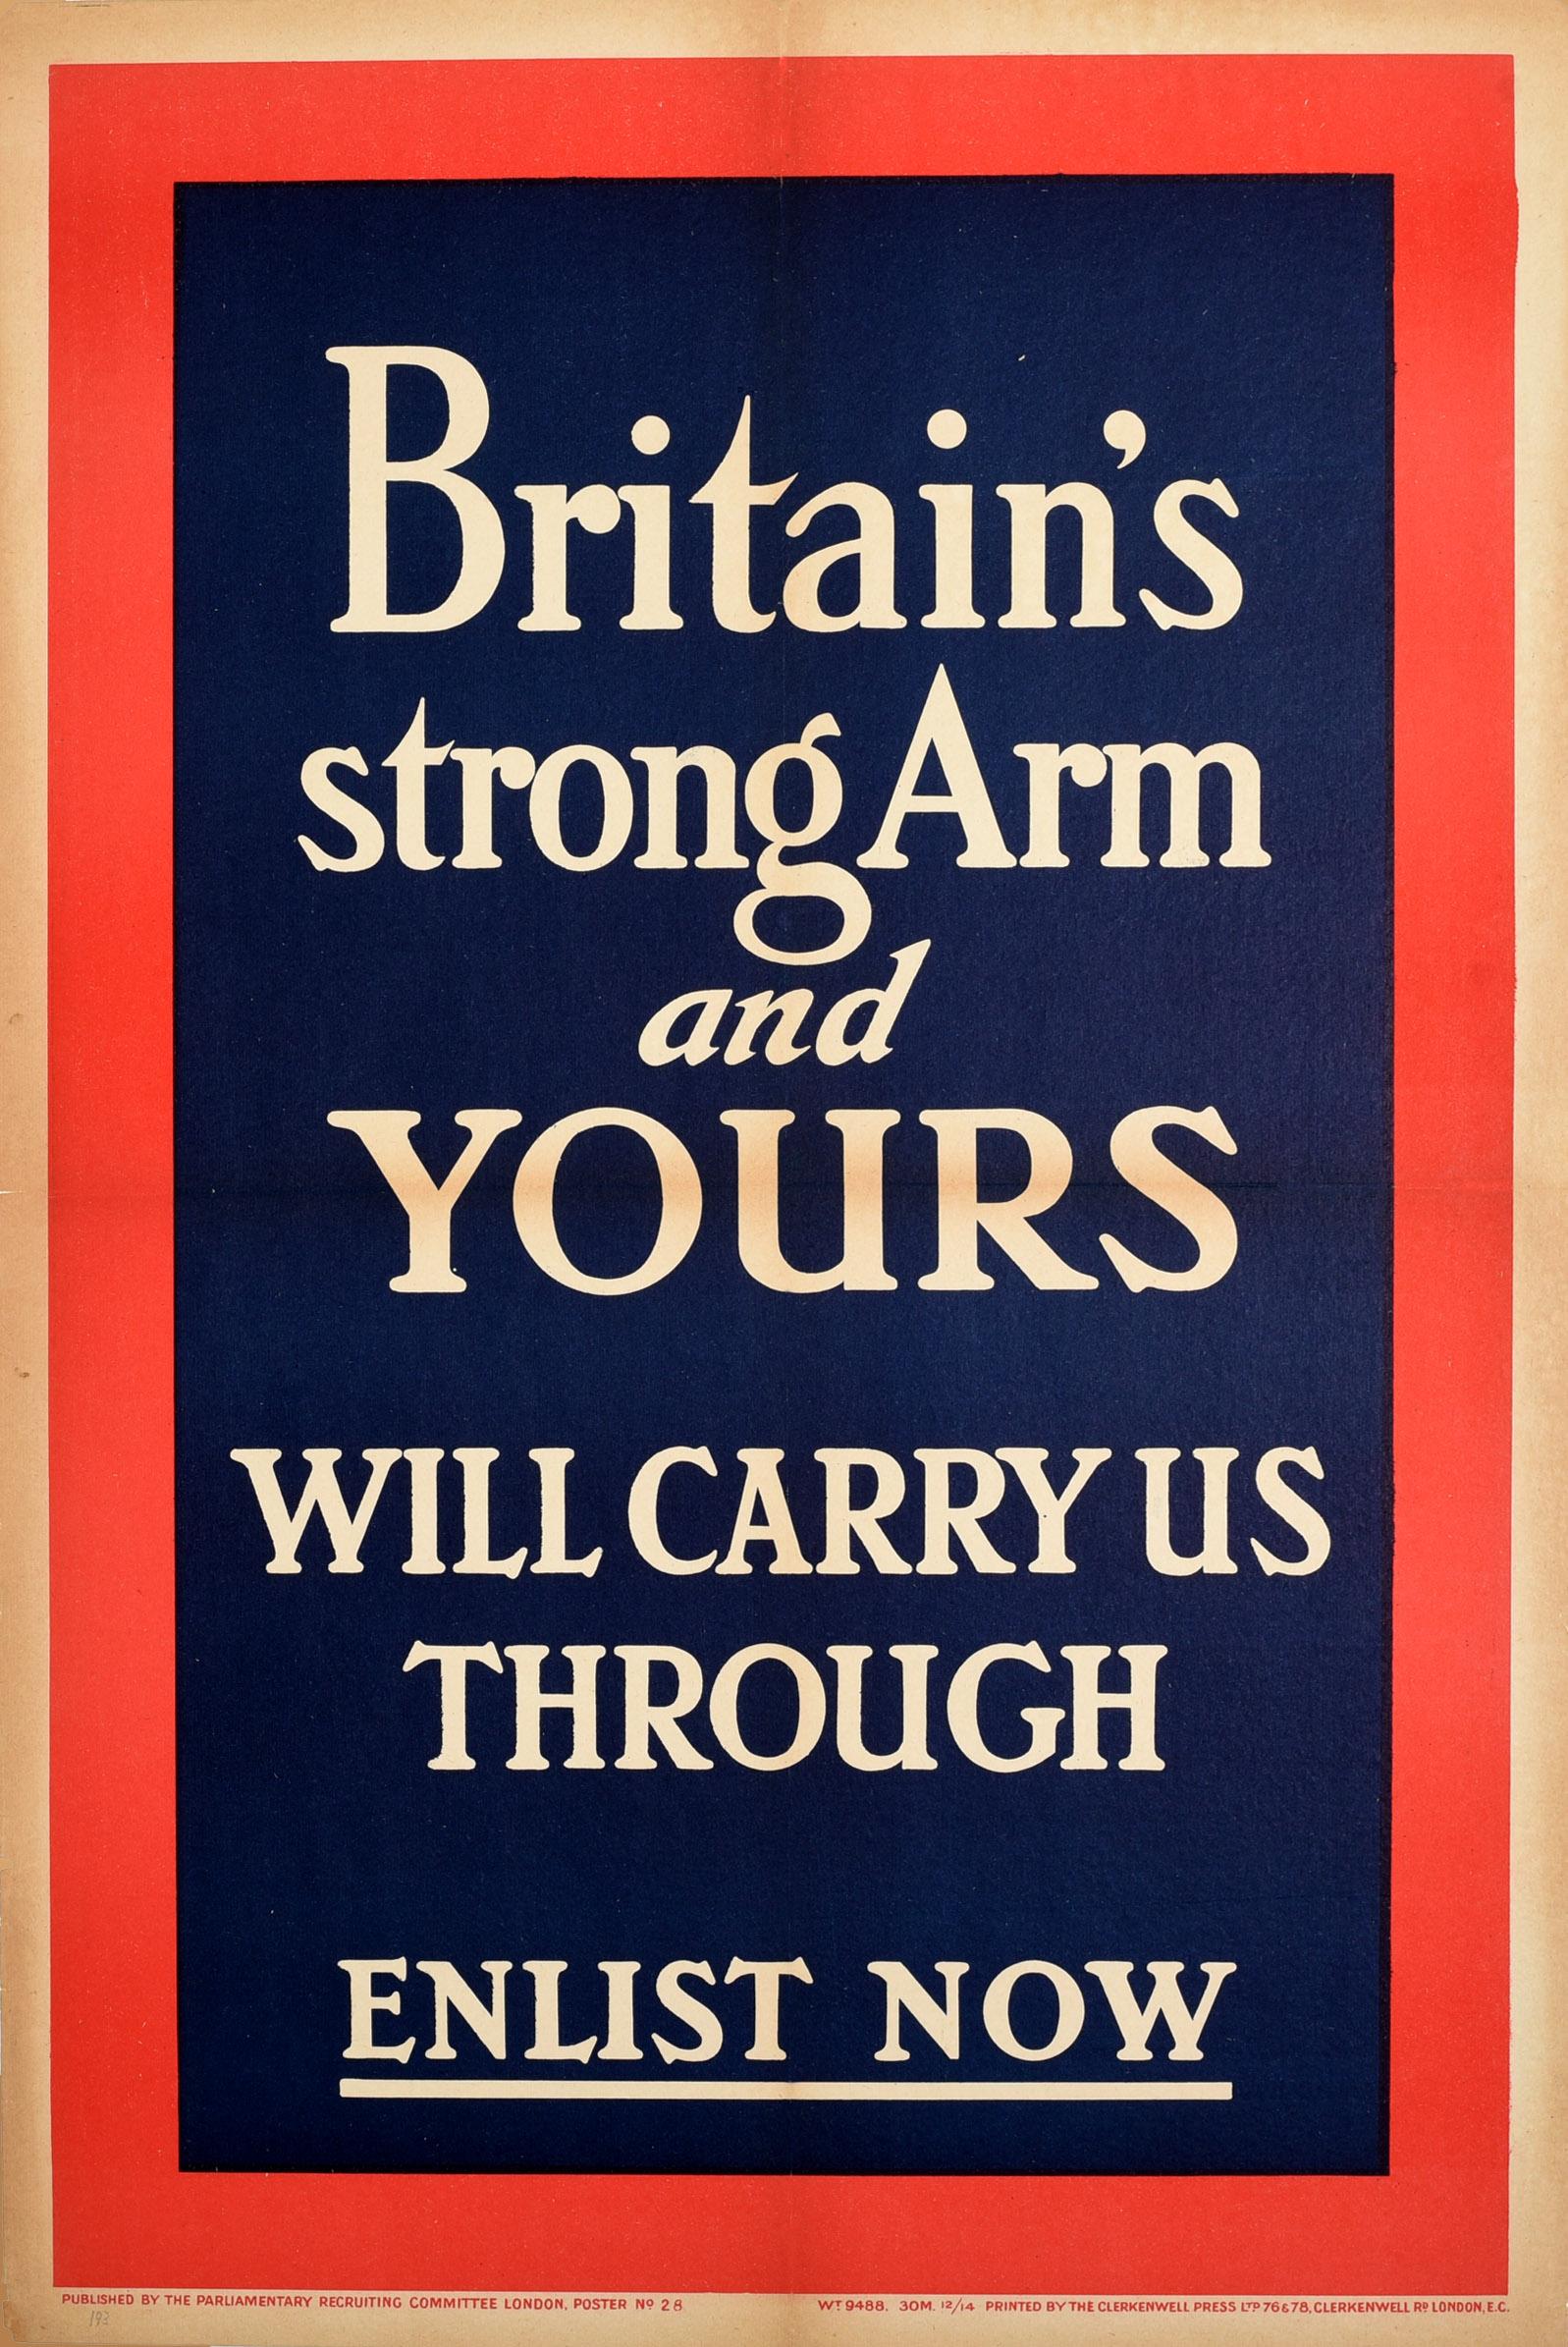 Unknown Print - Original Antique Poster Britain's Strong Arm Enlist Now WWI Military Recruitment